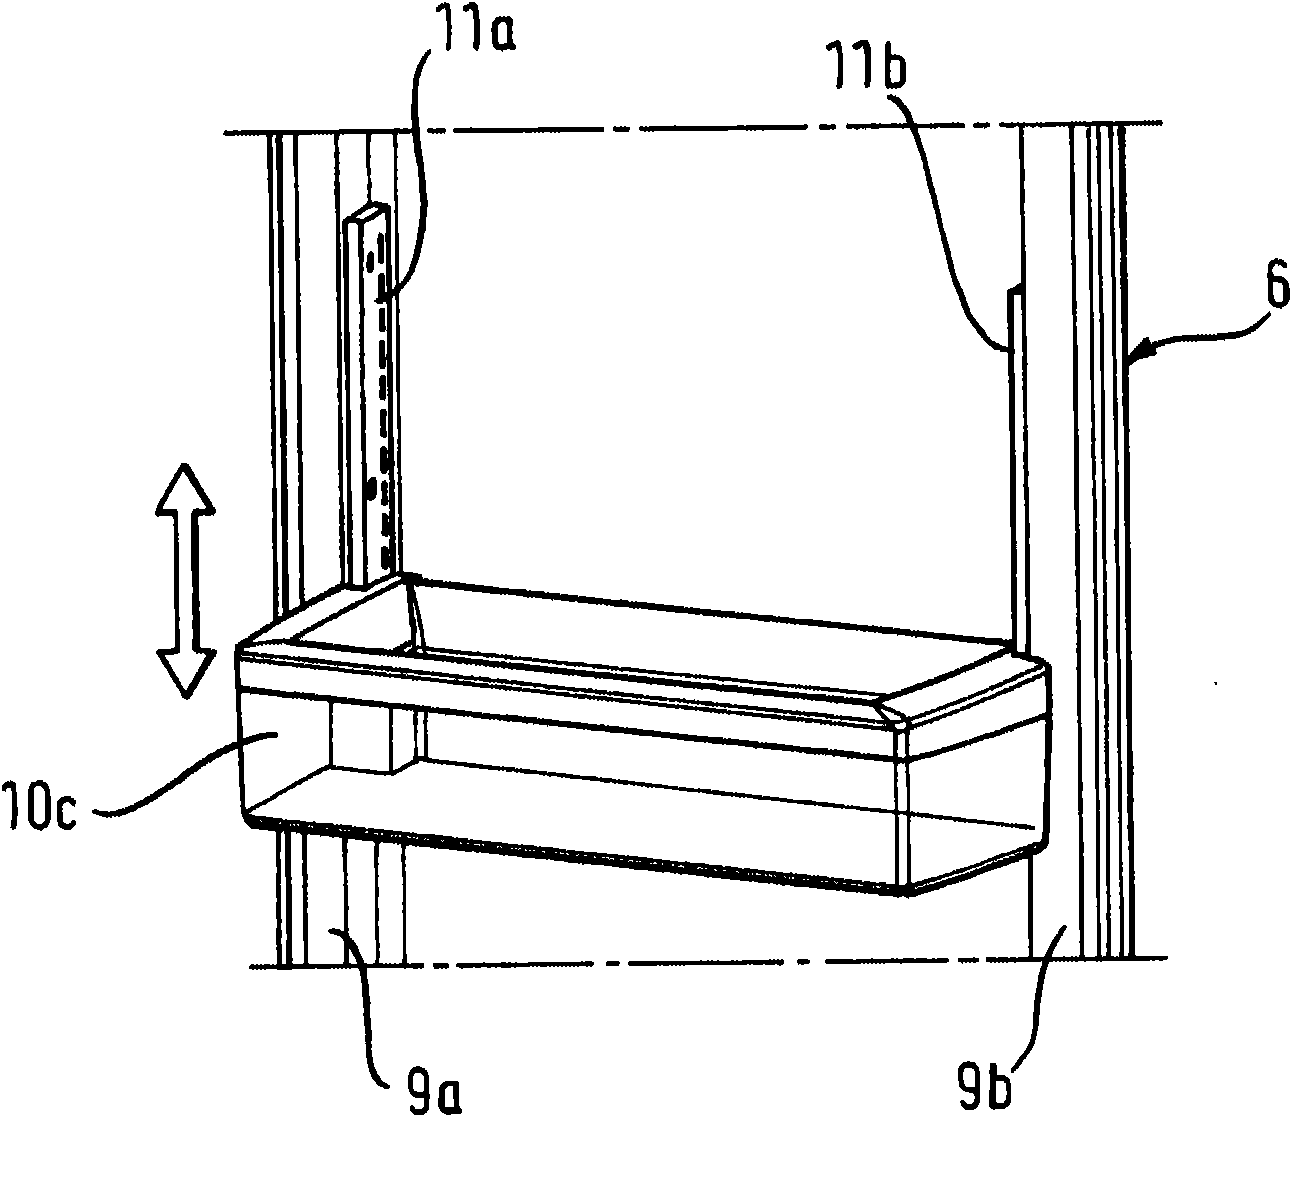 Refrigeration apparatus and associated latching means arrangement for subsequent attachment